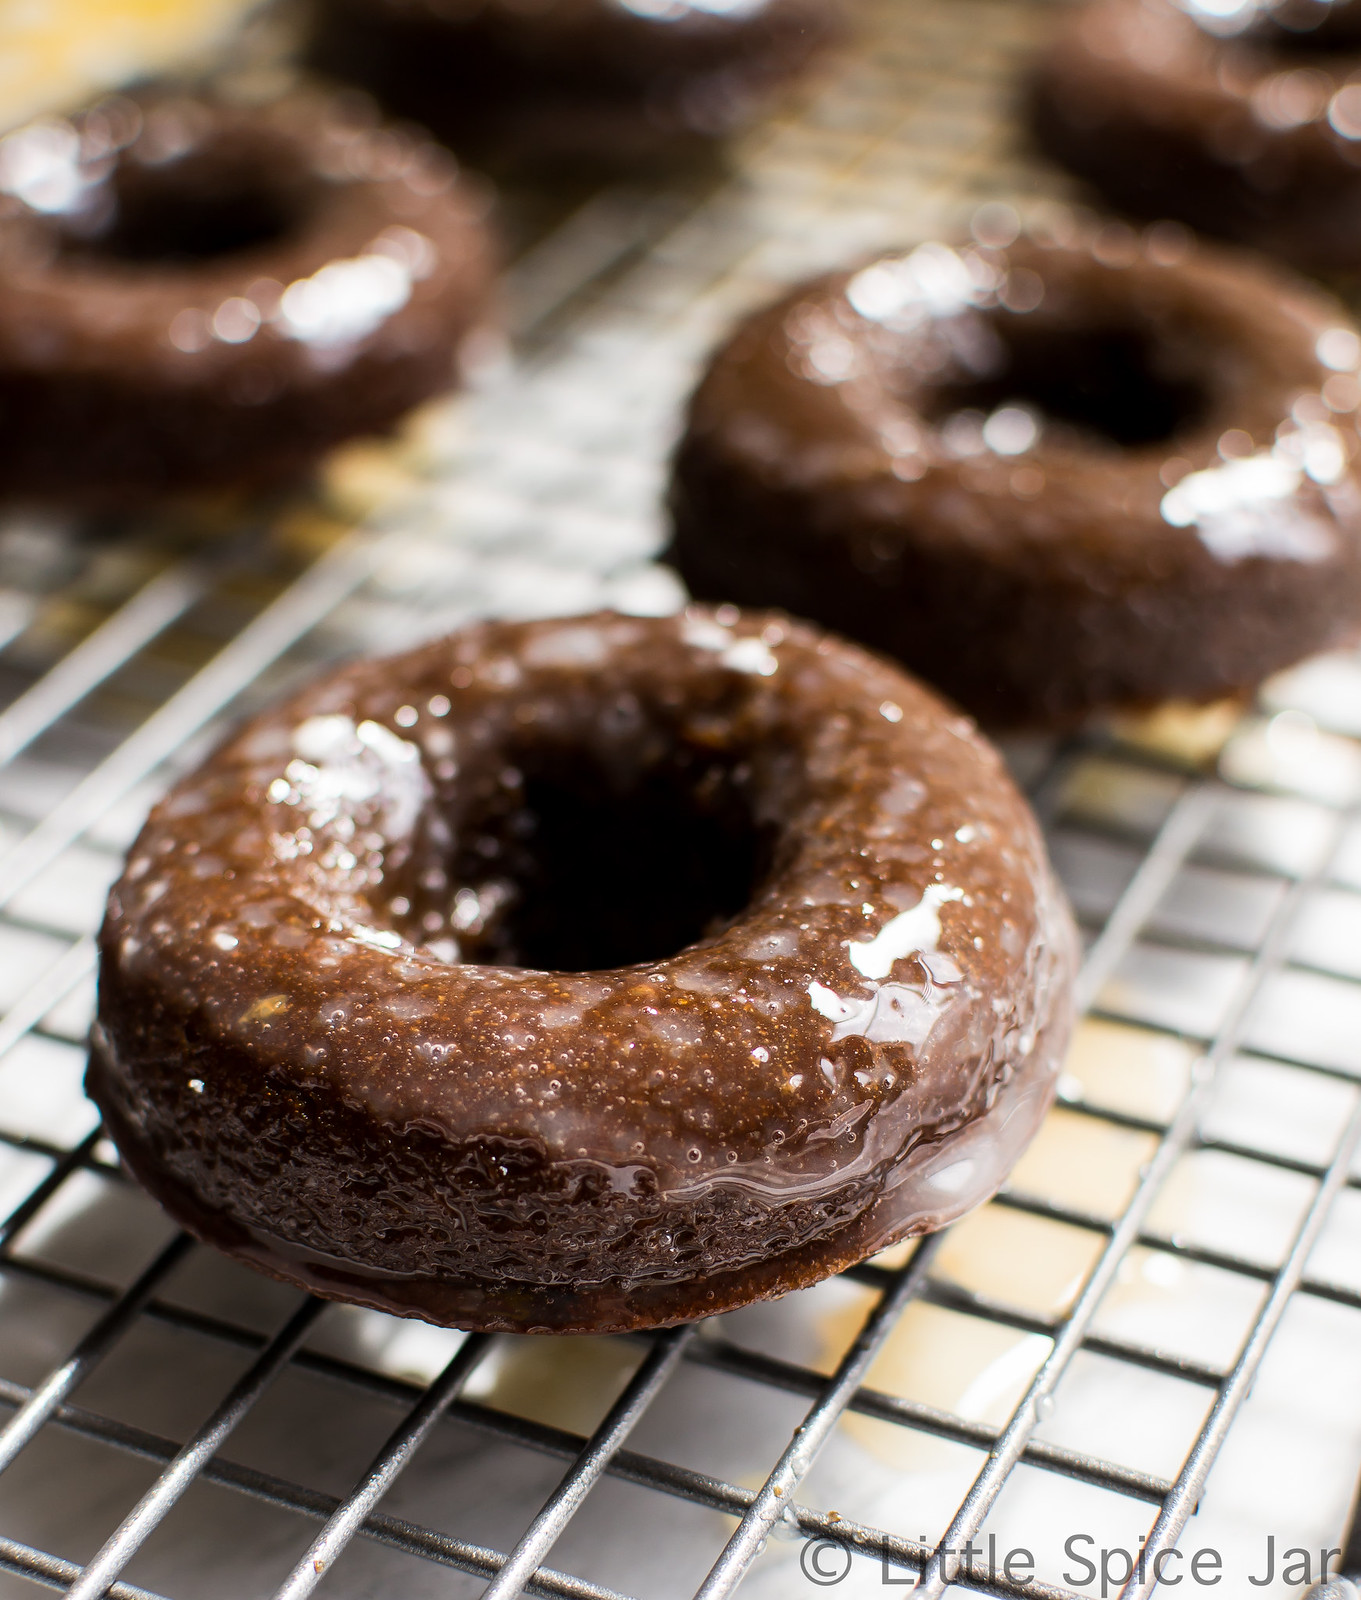 baked chocolate glazed donut on wire cooling rack